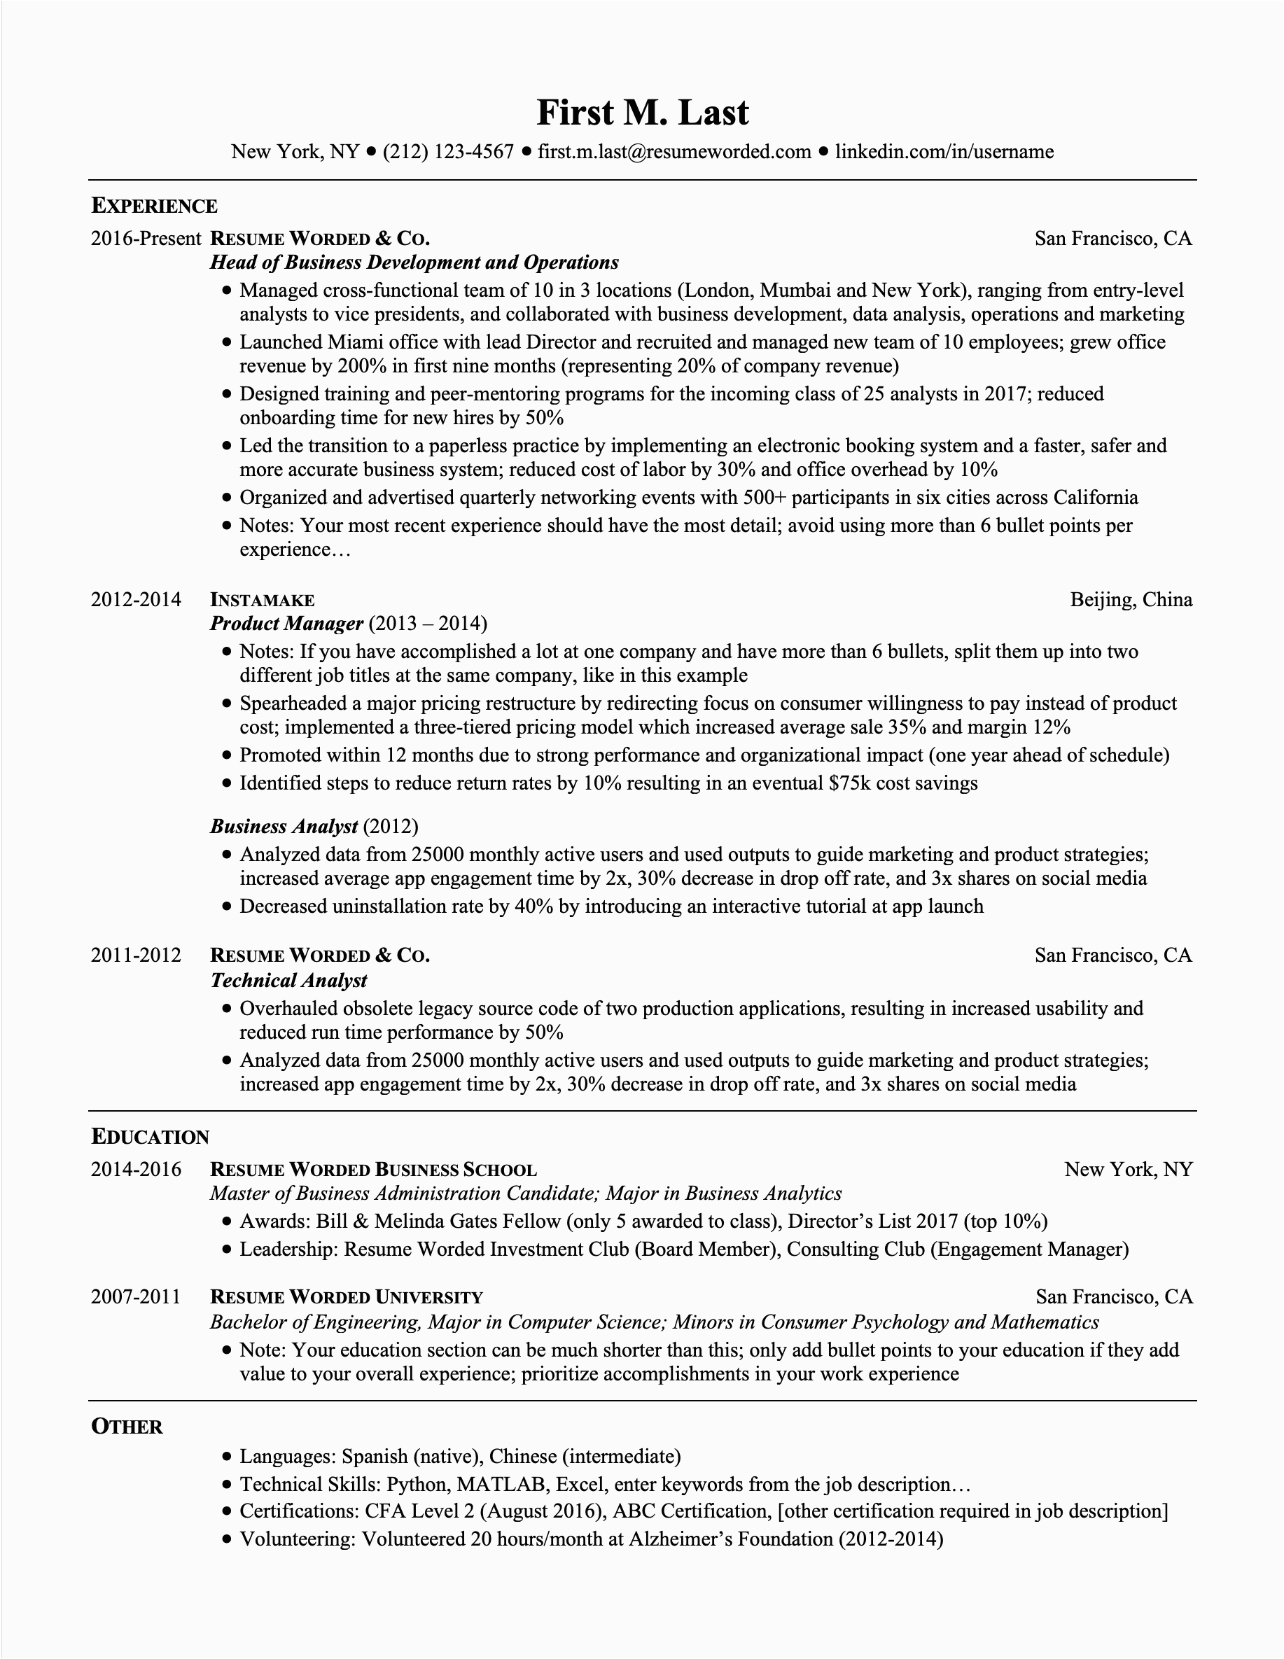 Sample Resume Same Company Multiple Positions Professional Sample Resume Multiple Positions Same Pany